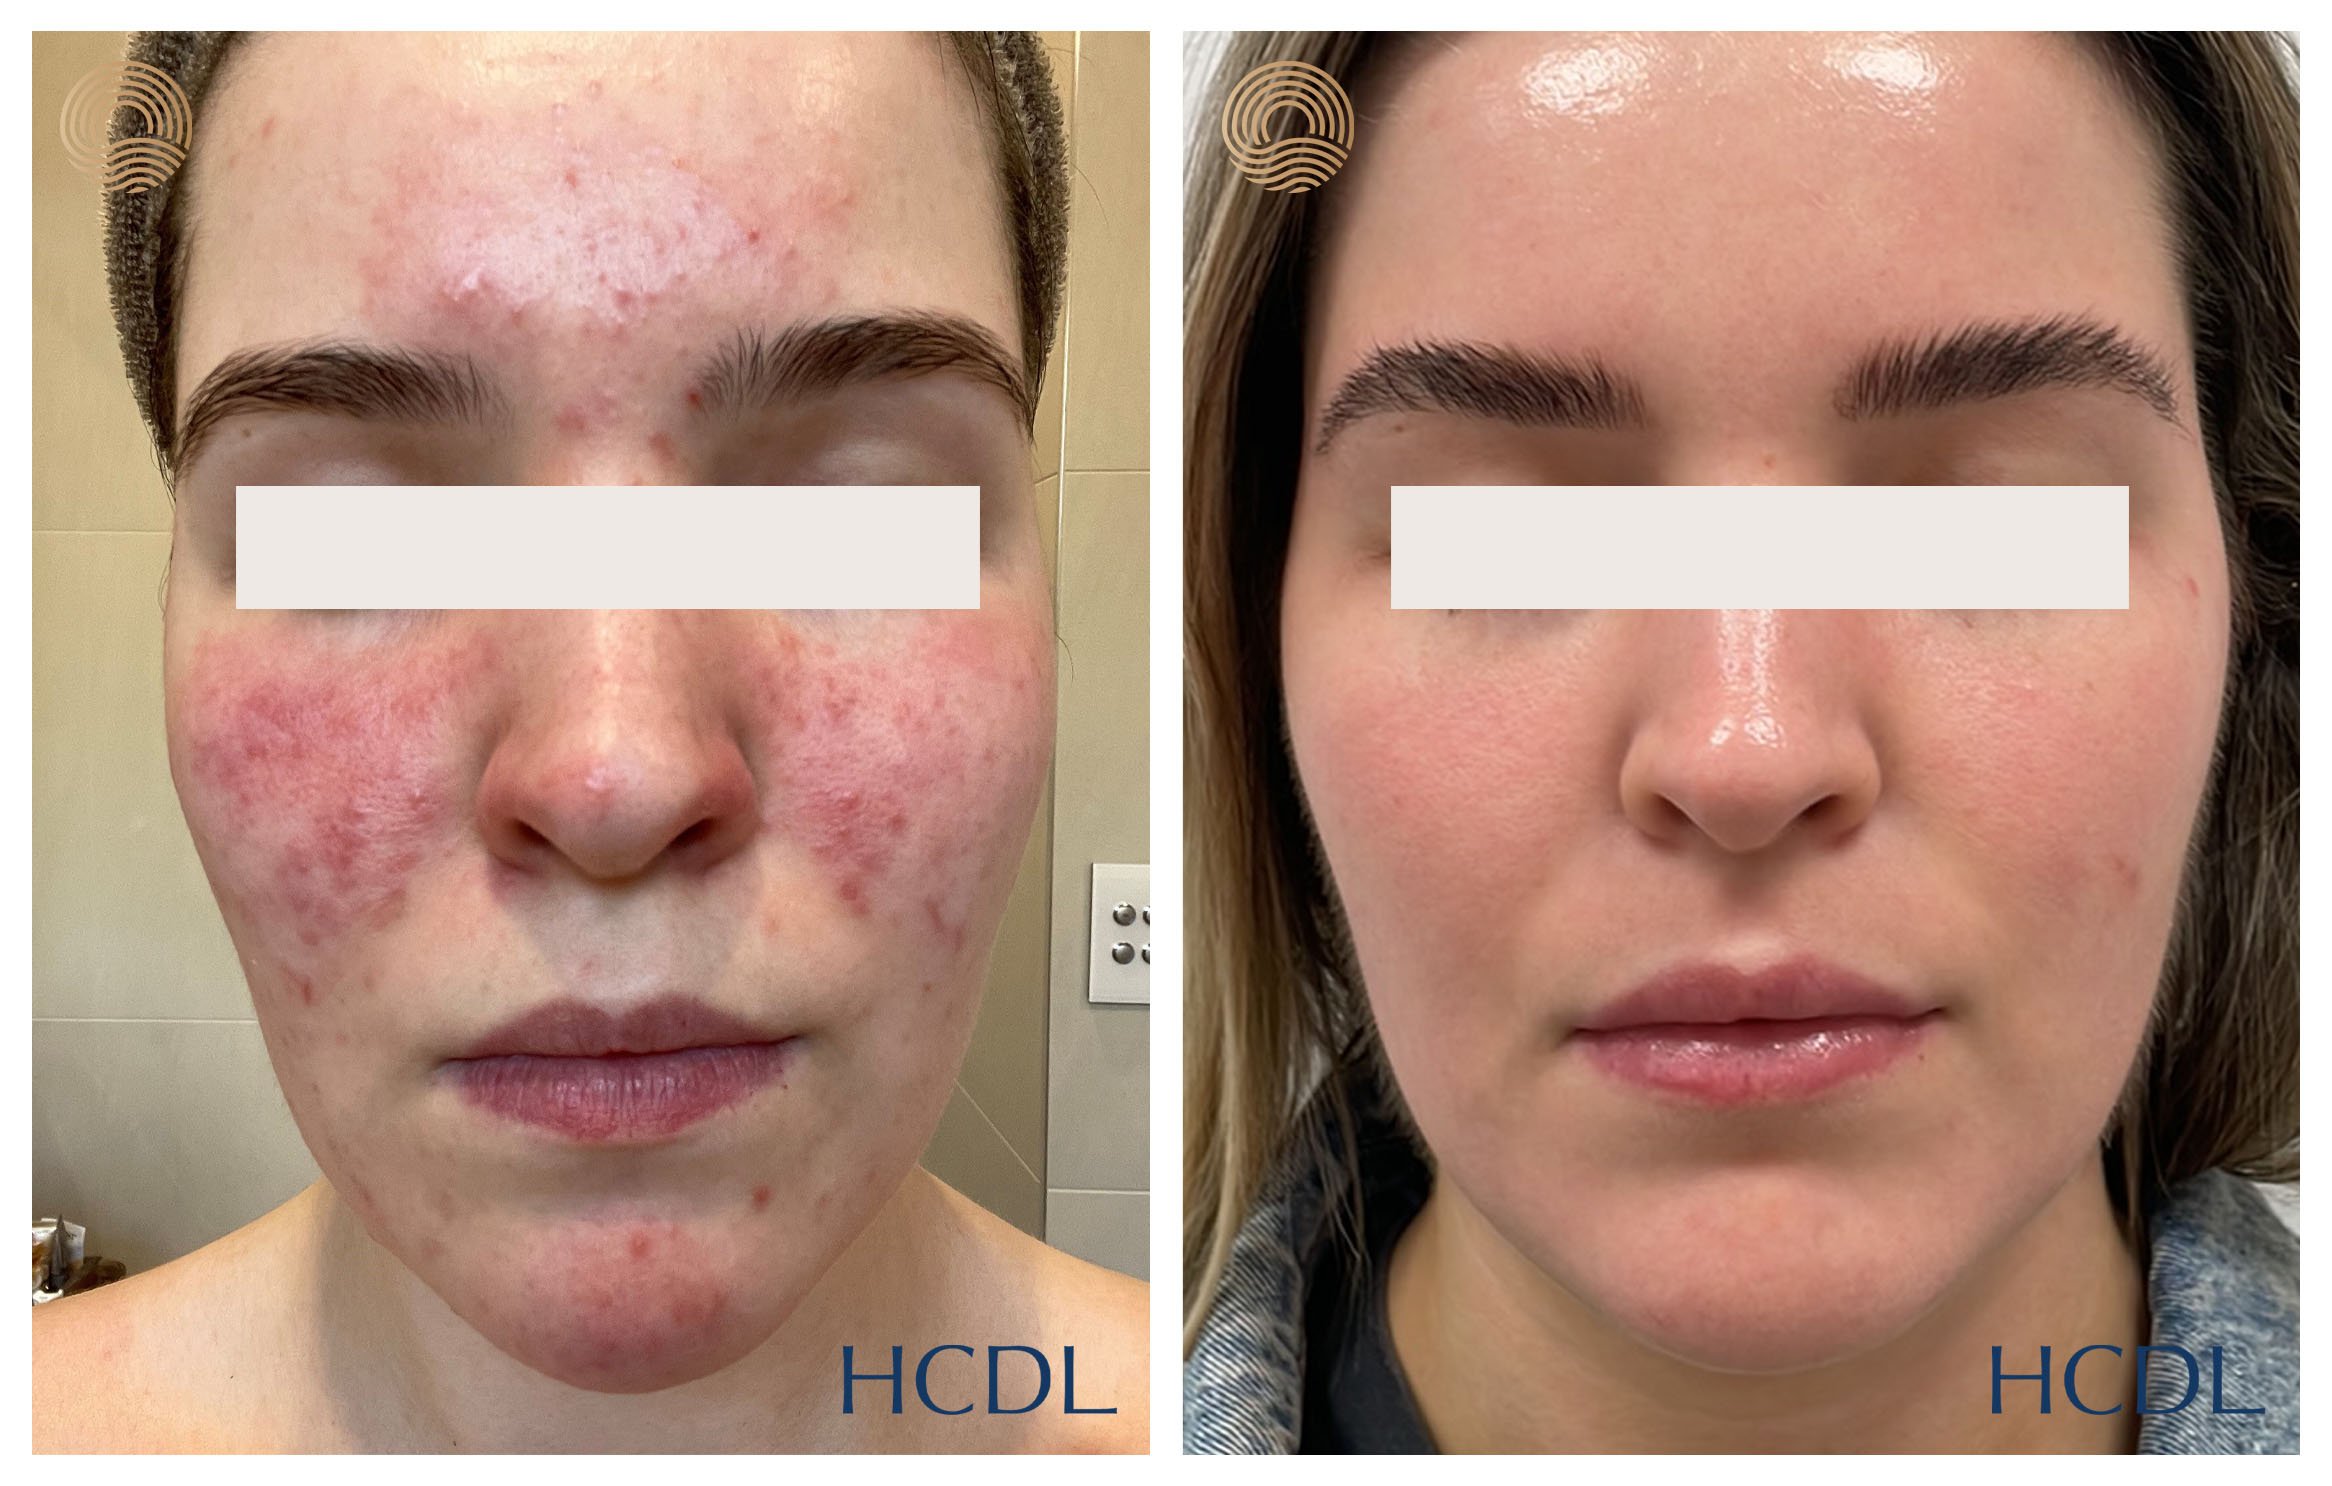 Results after Medical treatment for acne and 2 vascular laser treatments.